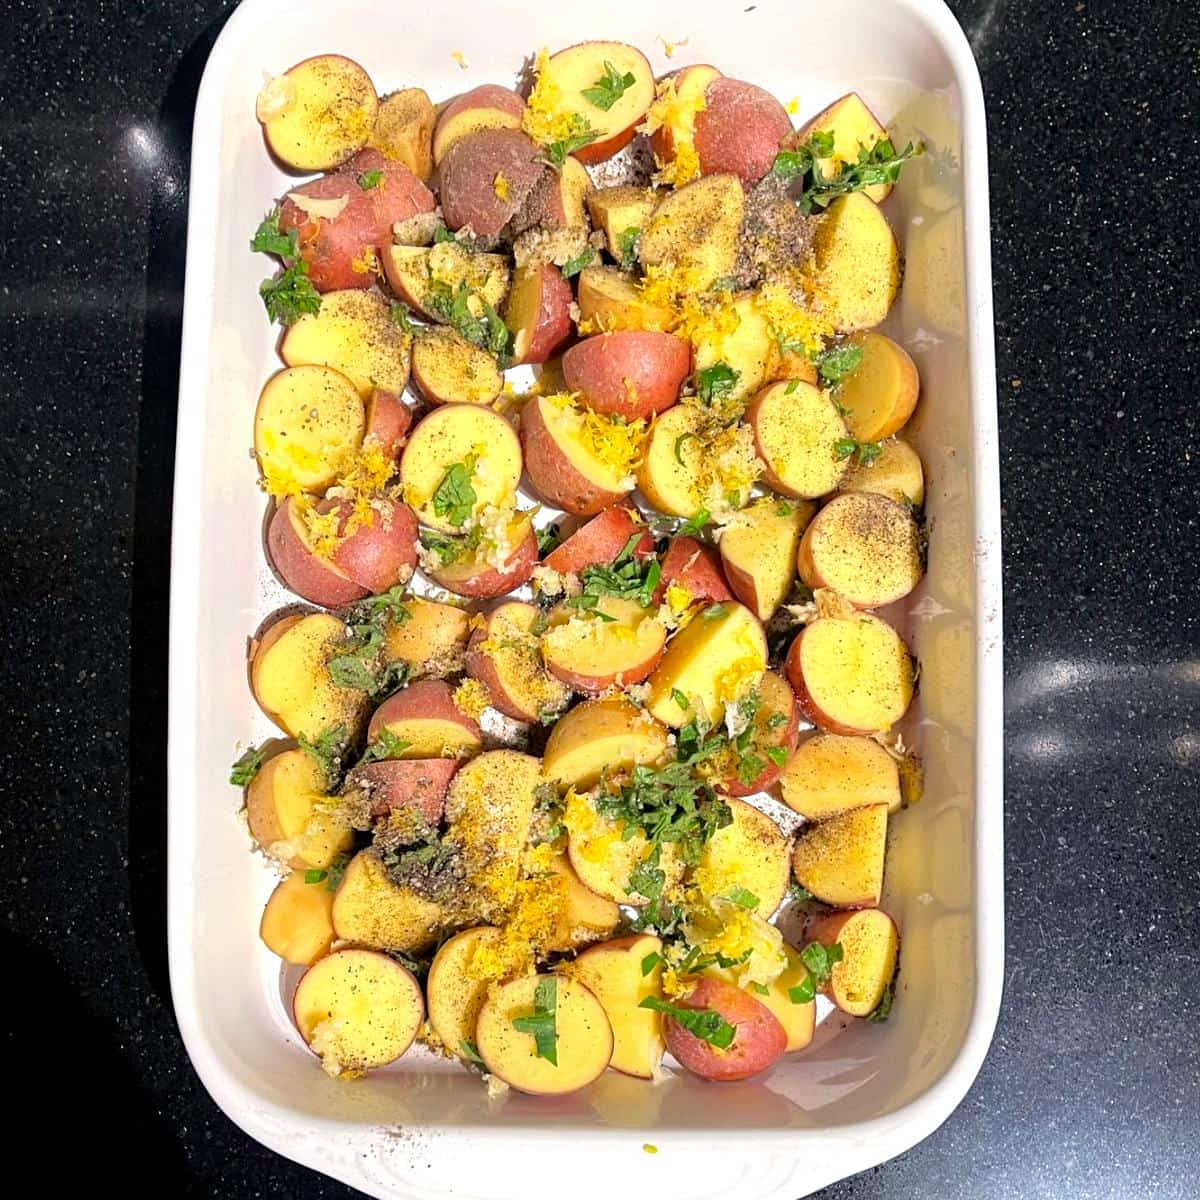 Add oregano, salt, lemon zest and pepper to the potatoes in the baking dish.